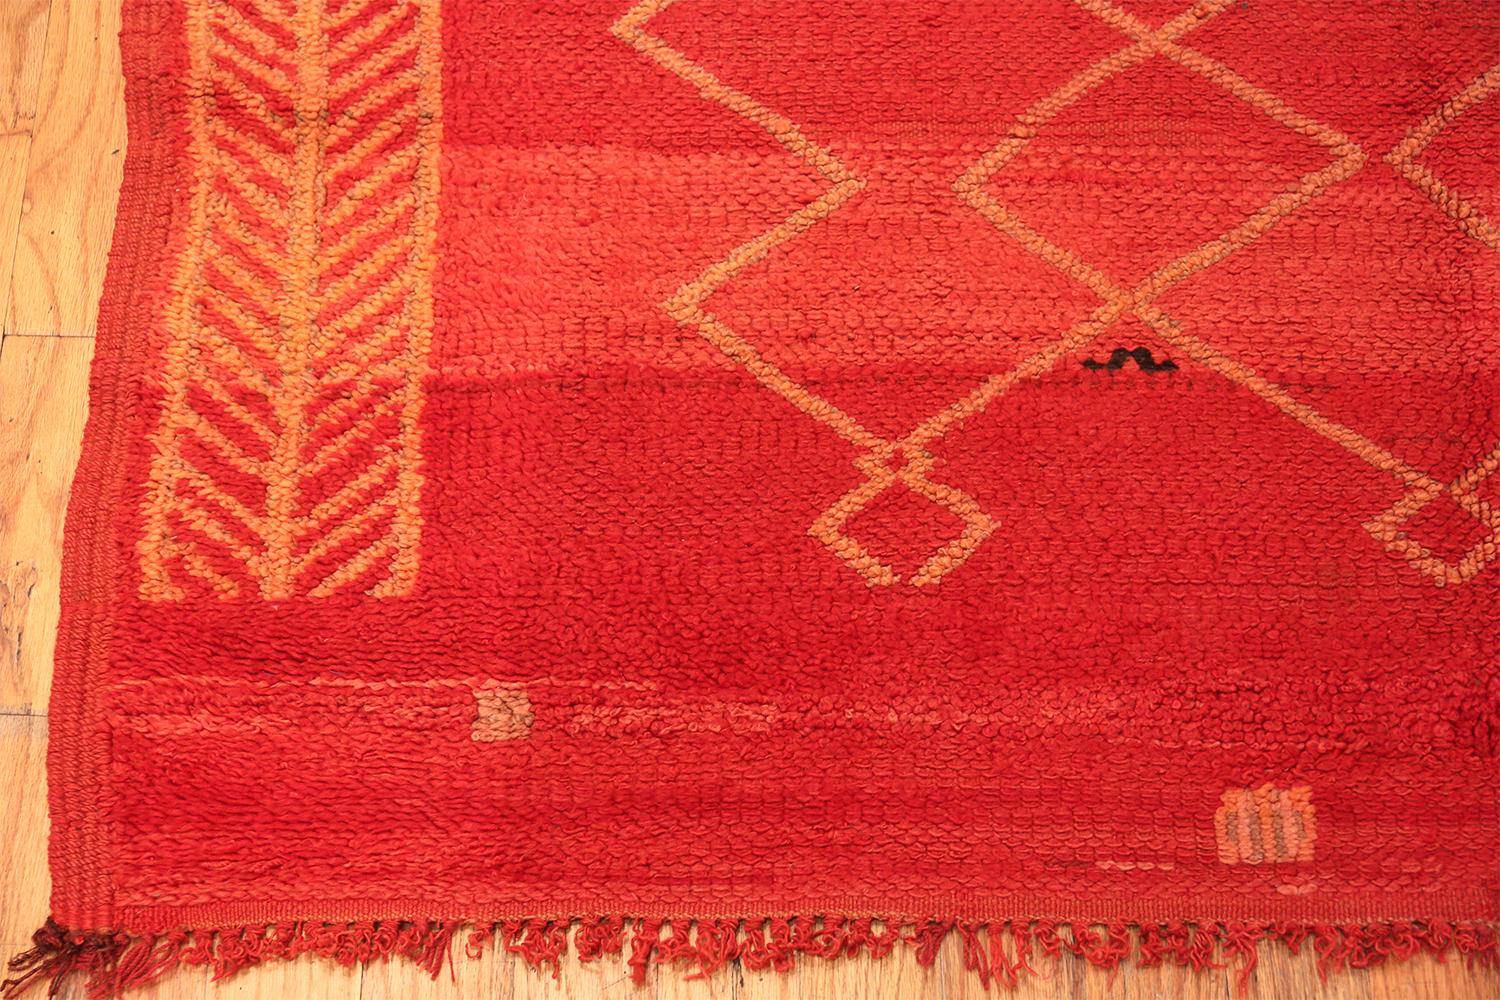 Hand-Knotted Vintage Moroccan Red Rug. Size: 5 ft. 6 in x 11 ft. 8 in